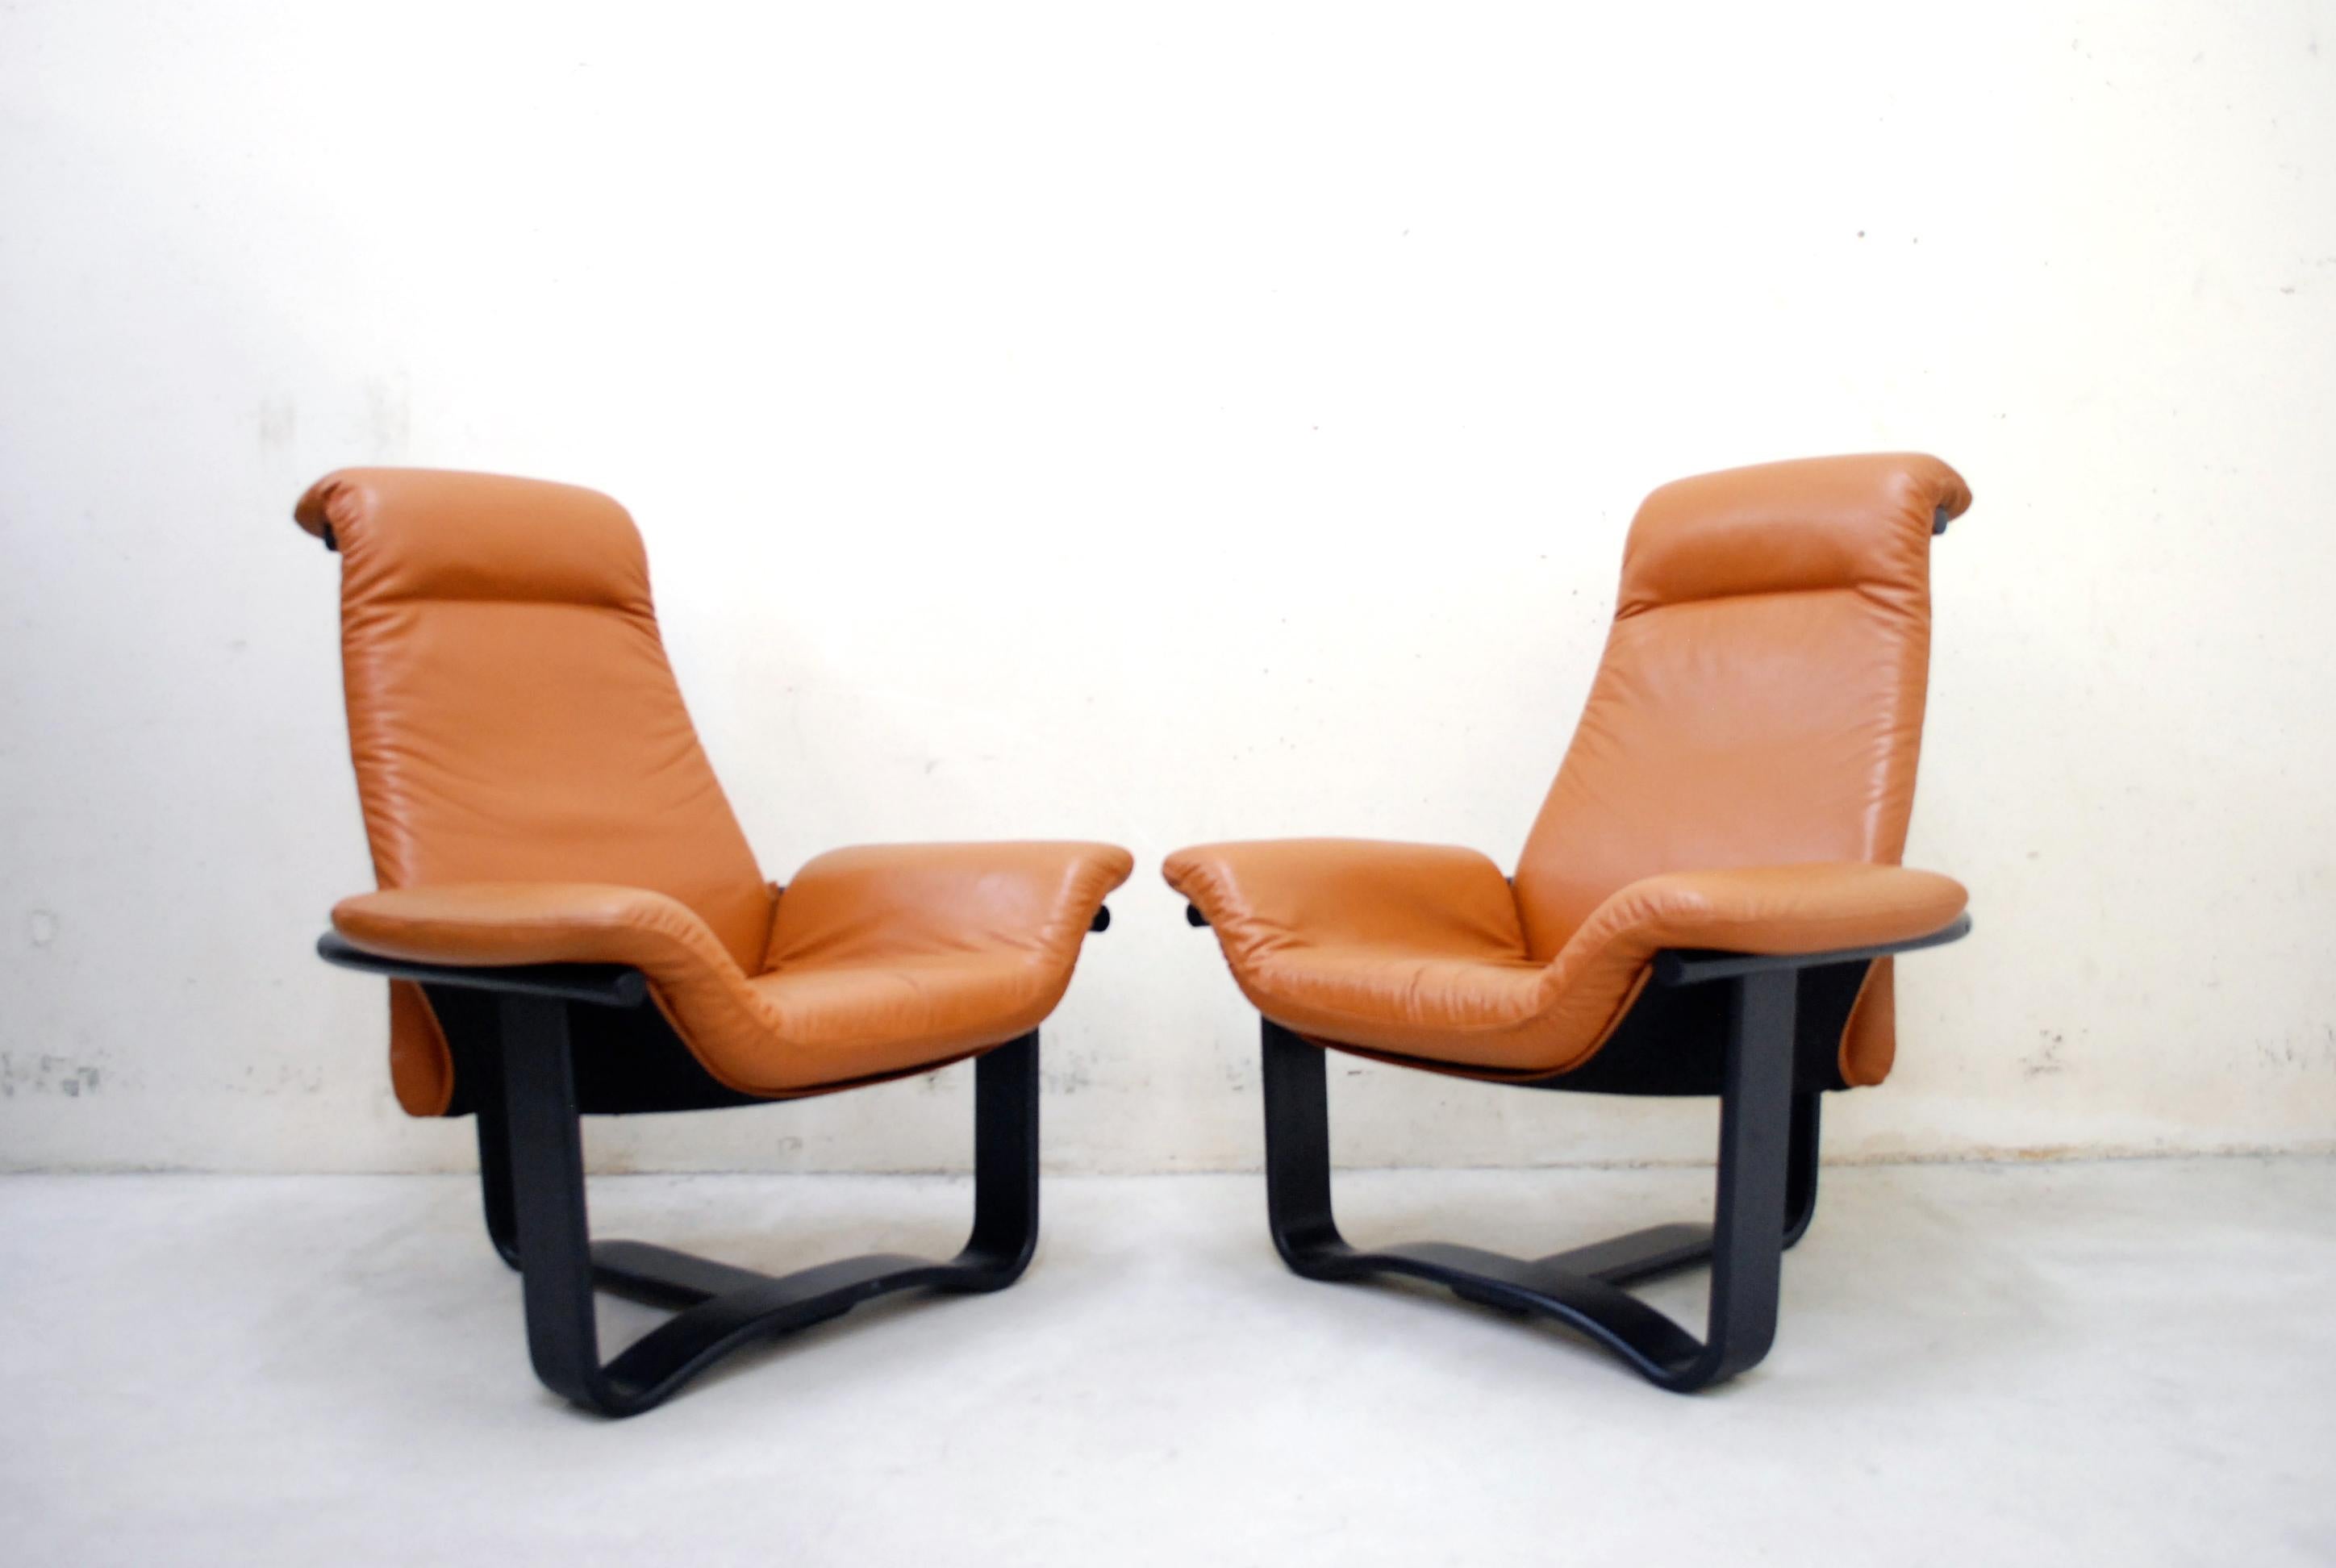 This 'Manta' lounge chair were designed by Ingmar Relling during the 1970s and were produced by Westnofa in Norway.
They are made from cognac aniline leather on a black bentwood frame.
In an excellent vintage condition.

Price for 1 chair.
We